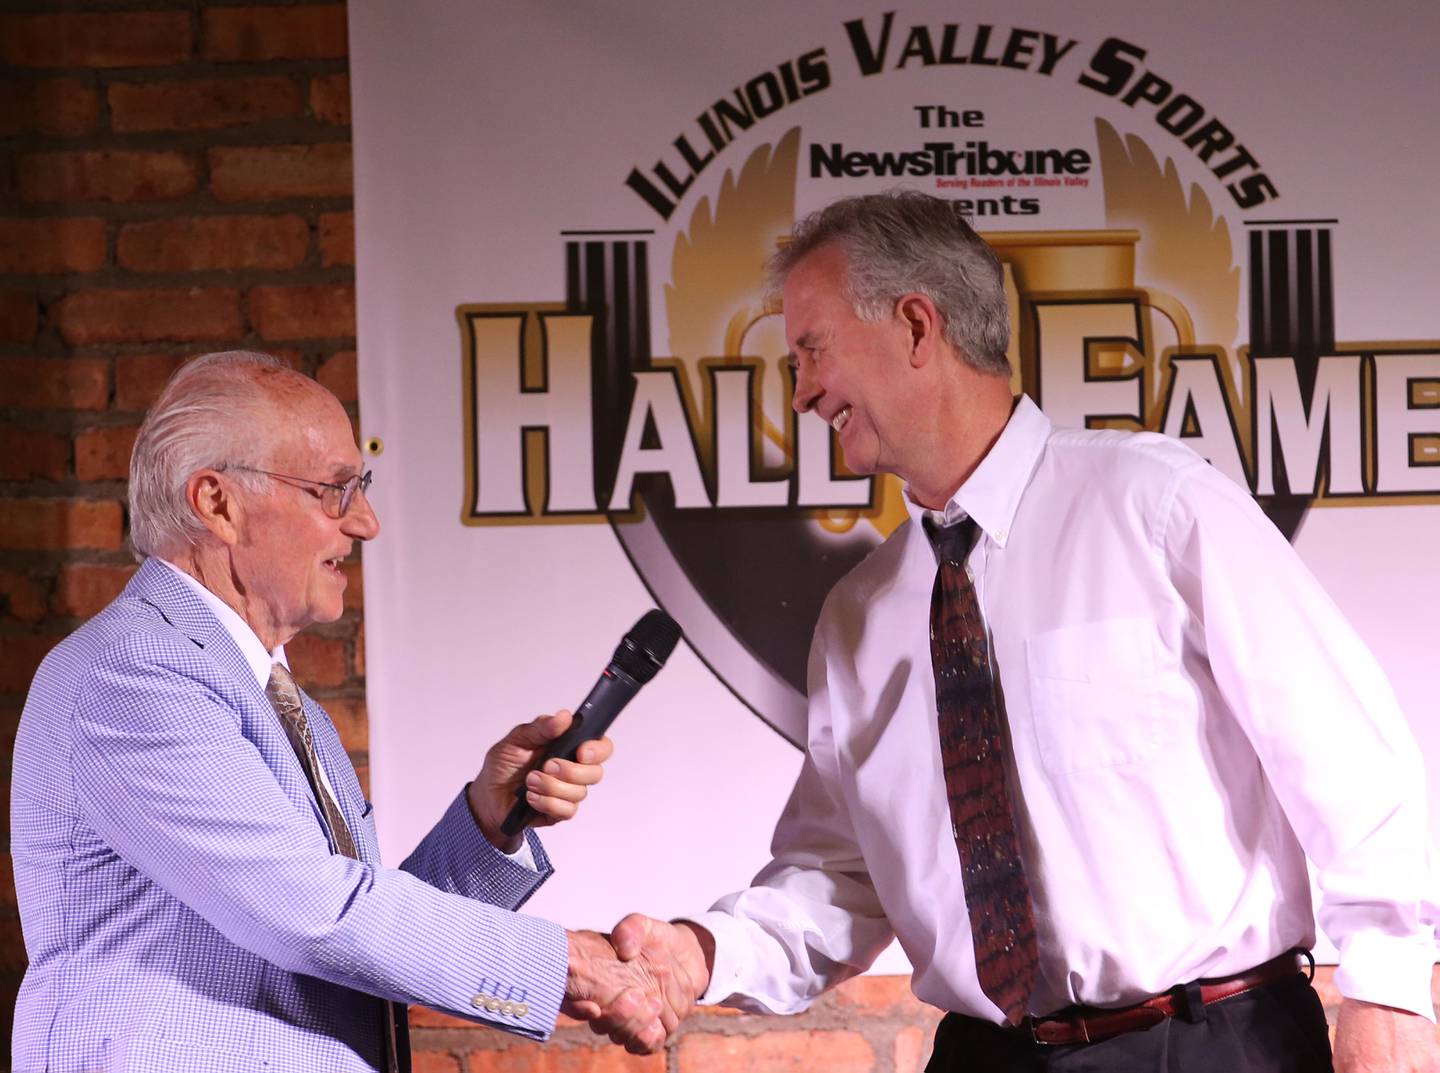 Lanny Slevin Emcee, congratulates Tom Henderson Jr. as he accepts the award of his father Tom henderson Sr. during the Shaw Media Illinois Valley Sports Hall of Fame on Thursday, June 8, 2023 at the Auditorium Ballroom in La Salle. Henderson was the boys and girls tennis coach at Ottawa Township High School from 1958-2007.